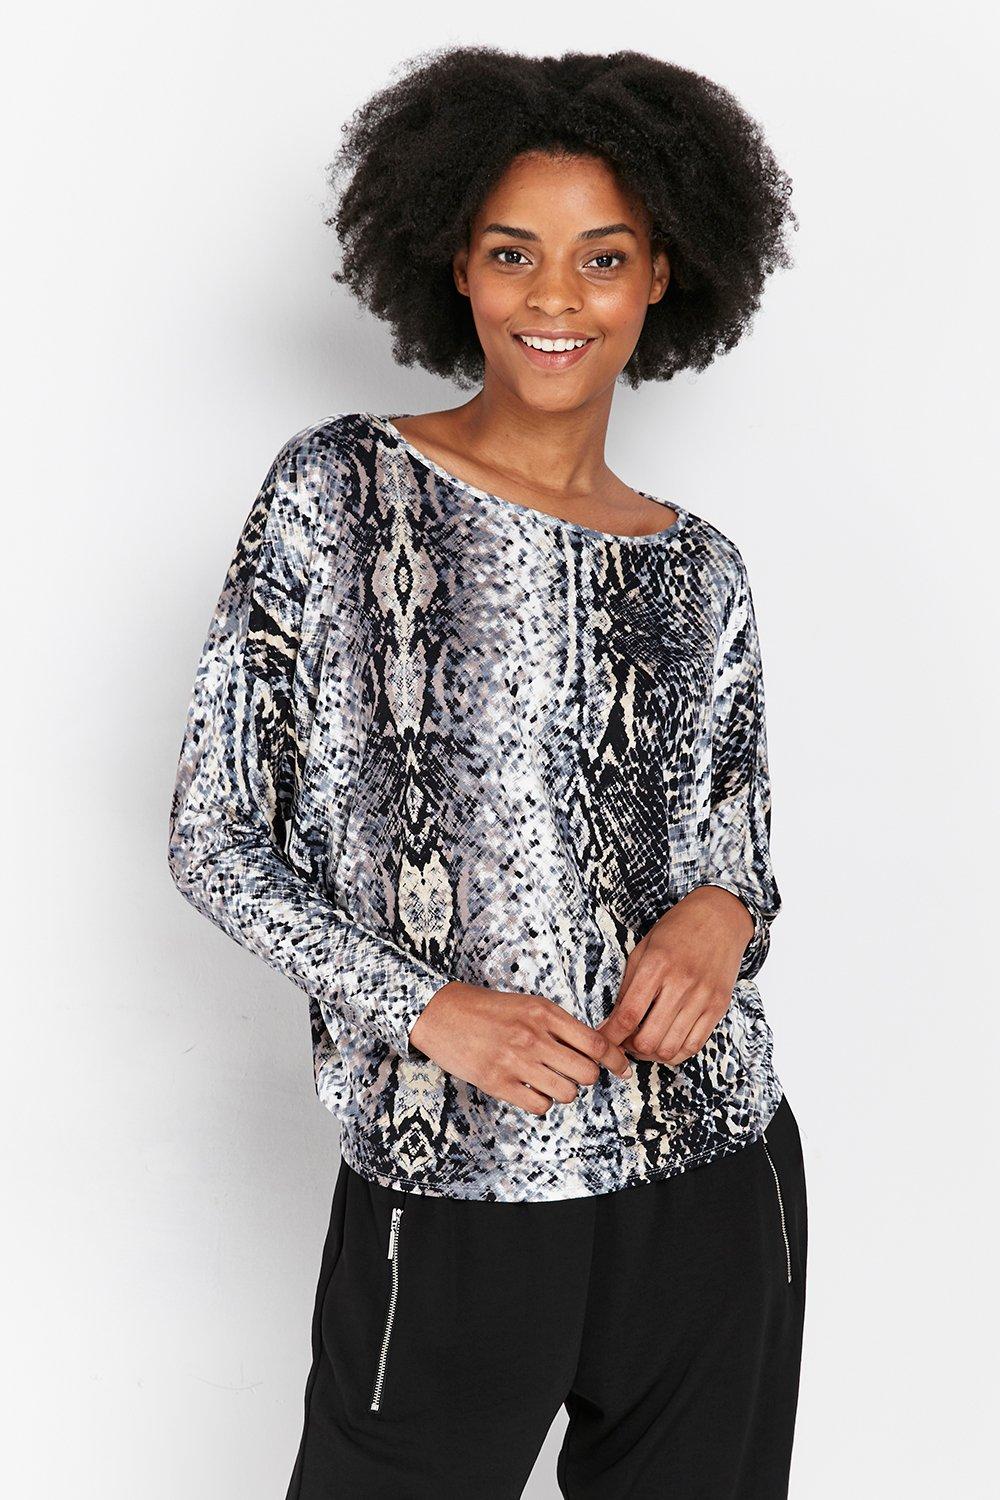 The Stylish Top To Add To Your Collection. A Chic Snakeskin Finish Makes This A Must-Have, Whilst A Relaxed Fit And Contemporary Batwing Sleeves Mean This Is Sure To Flatter. Wear With Black Skinny Jeans And Ankle Boots For Easy Everyday Style.  Shirt Rou